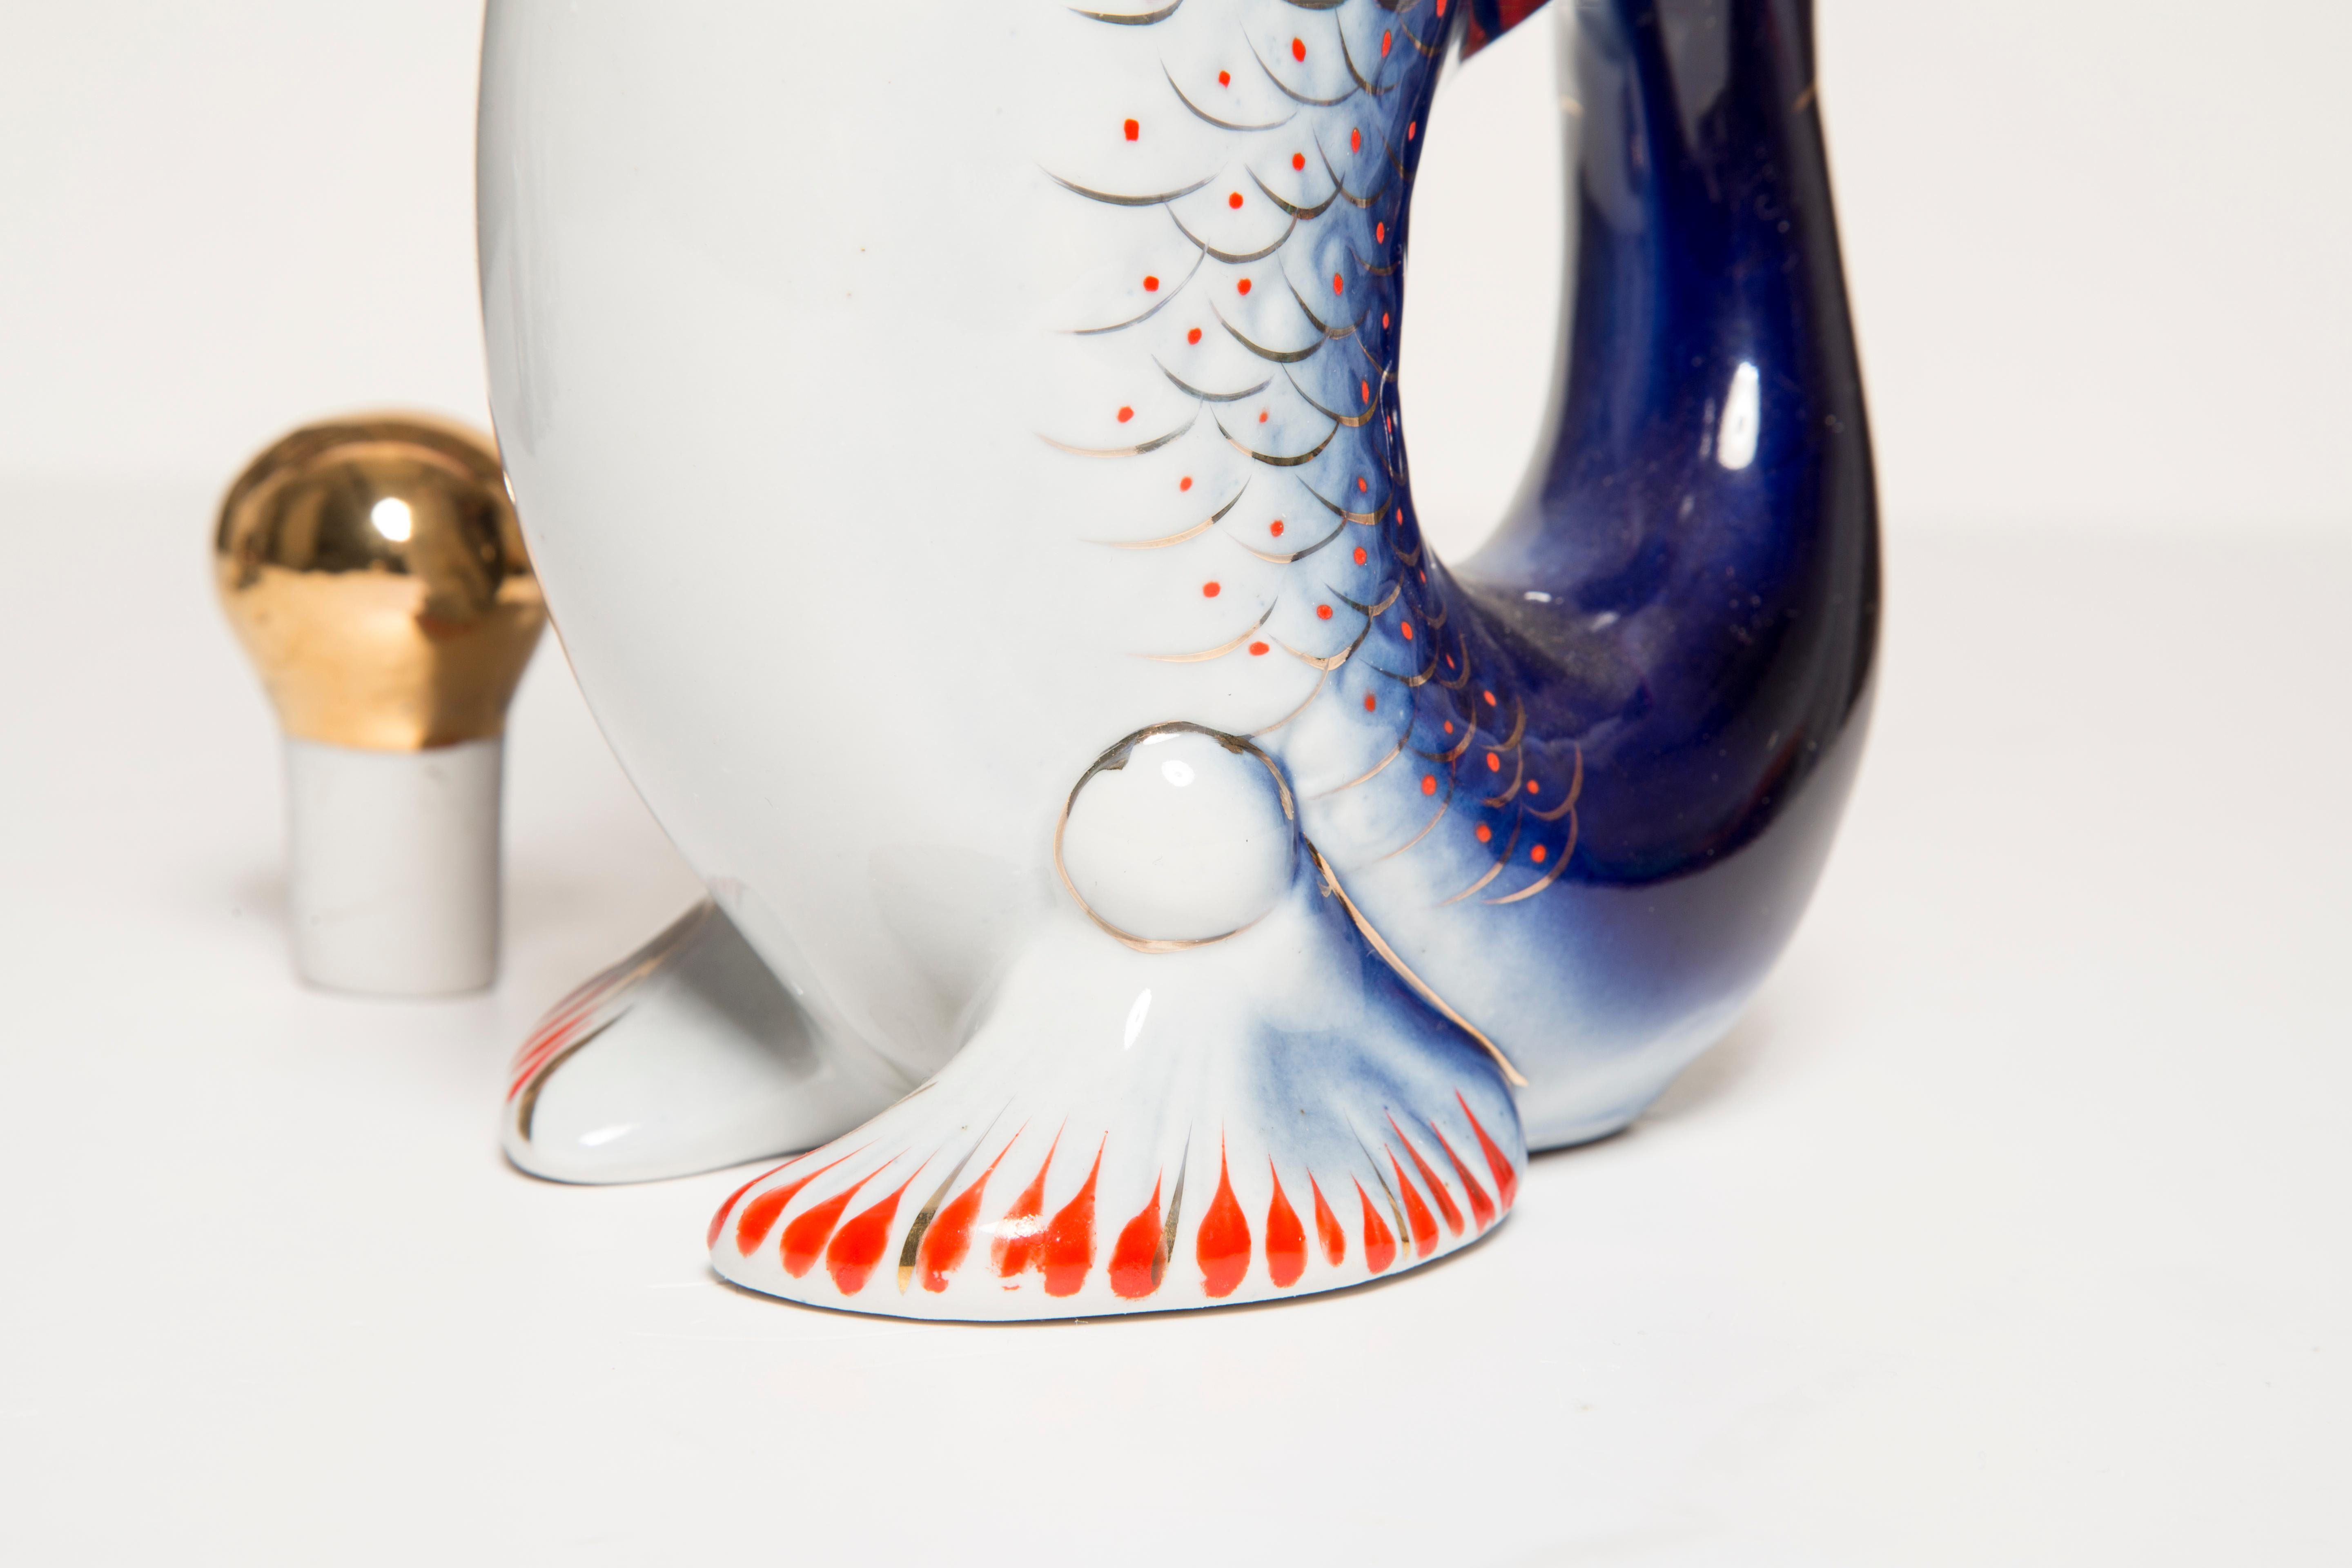 Blue Fish Glass Decanter and Glasses, 20th Century, Europe, 1960s For Sale 6